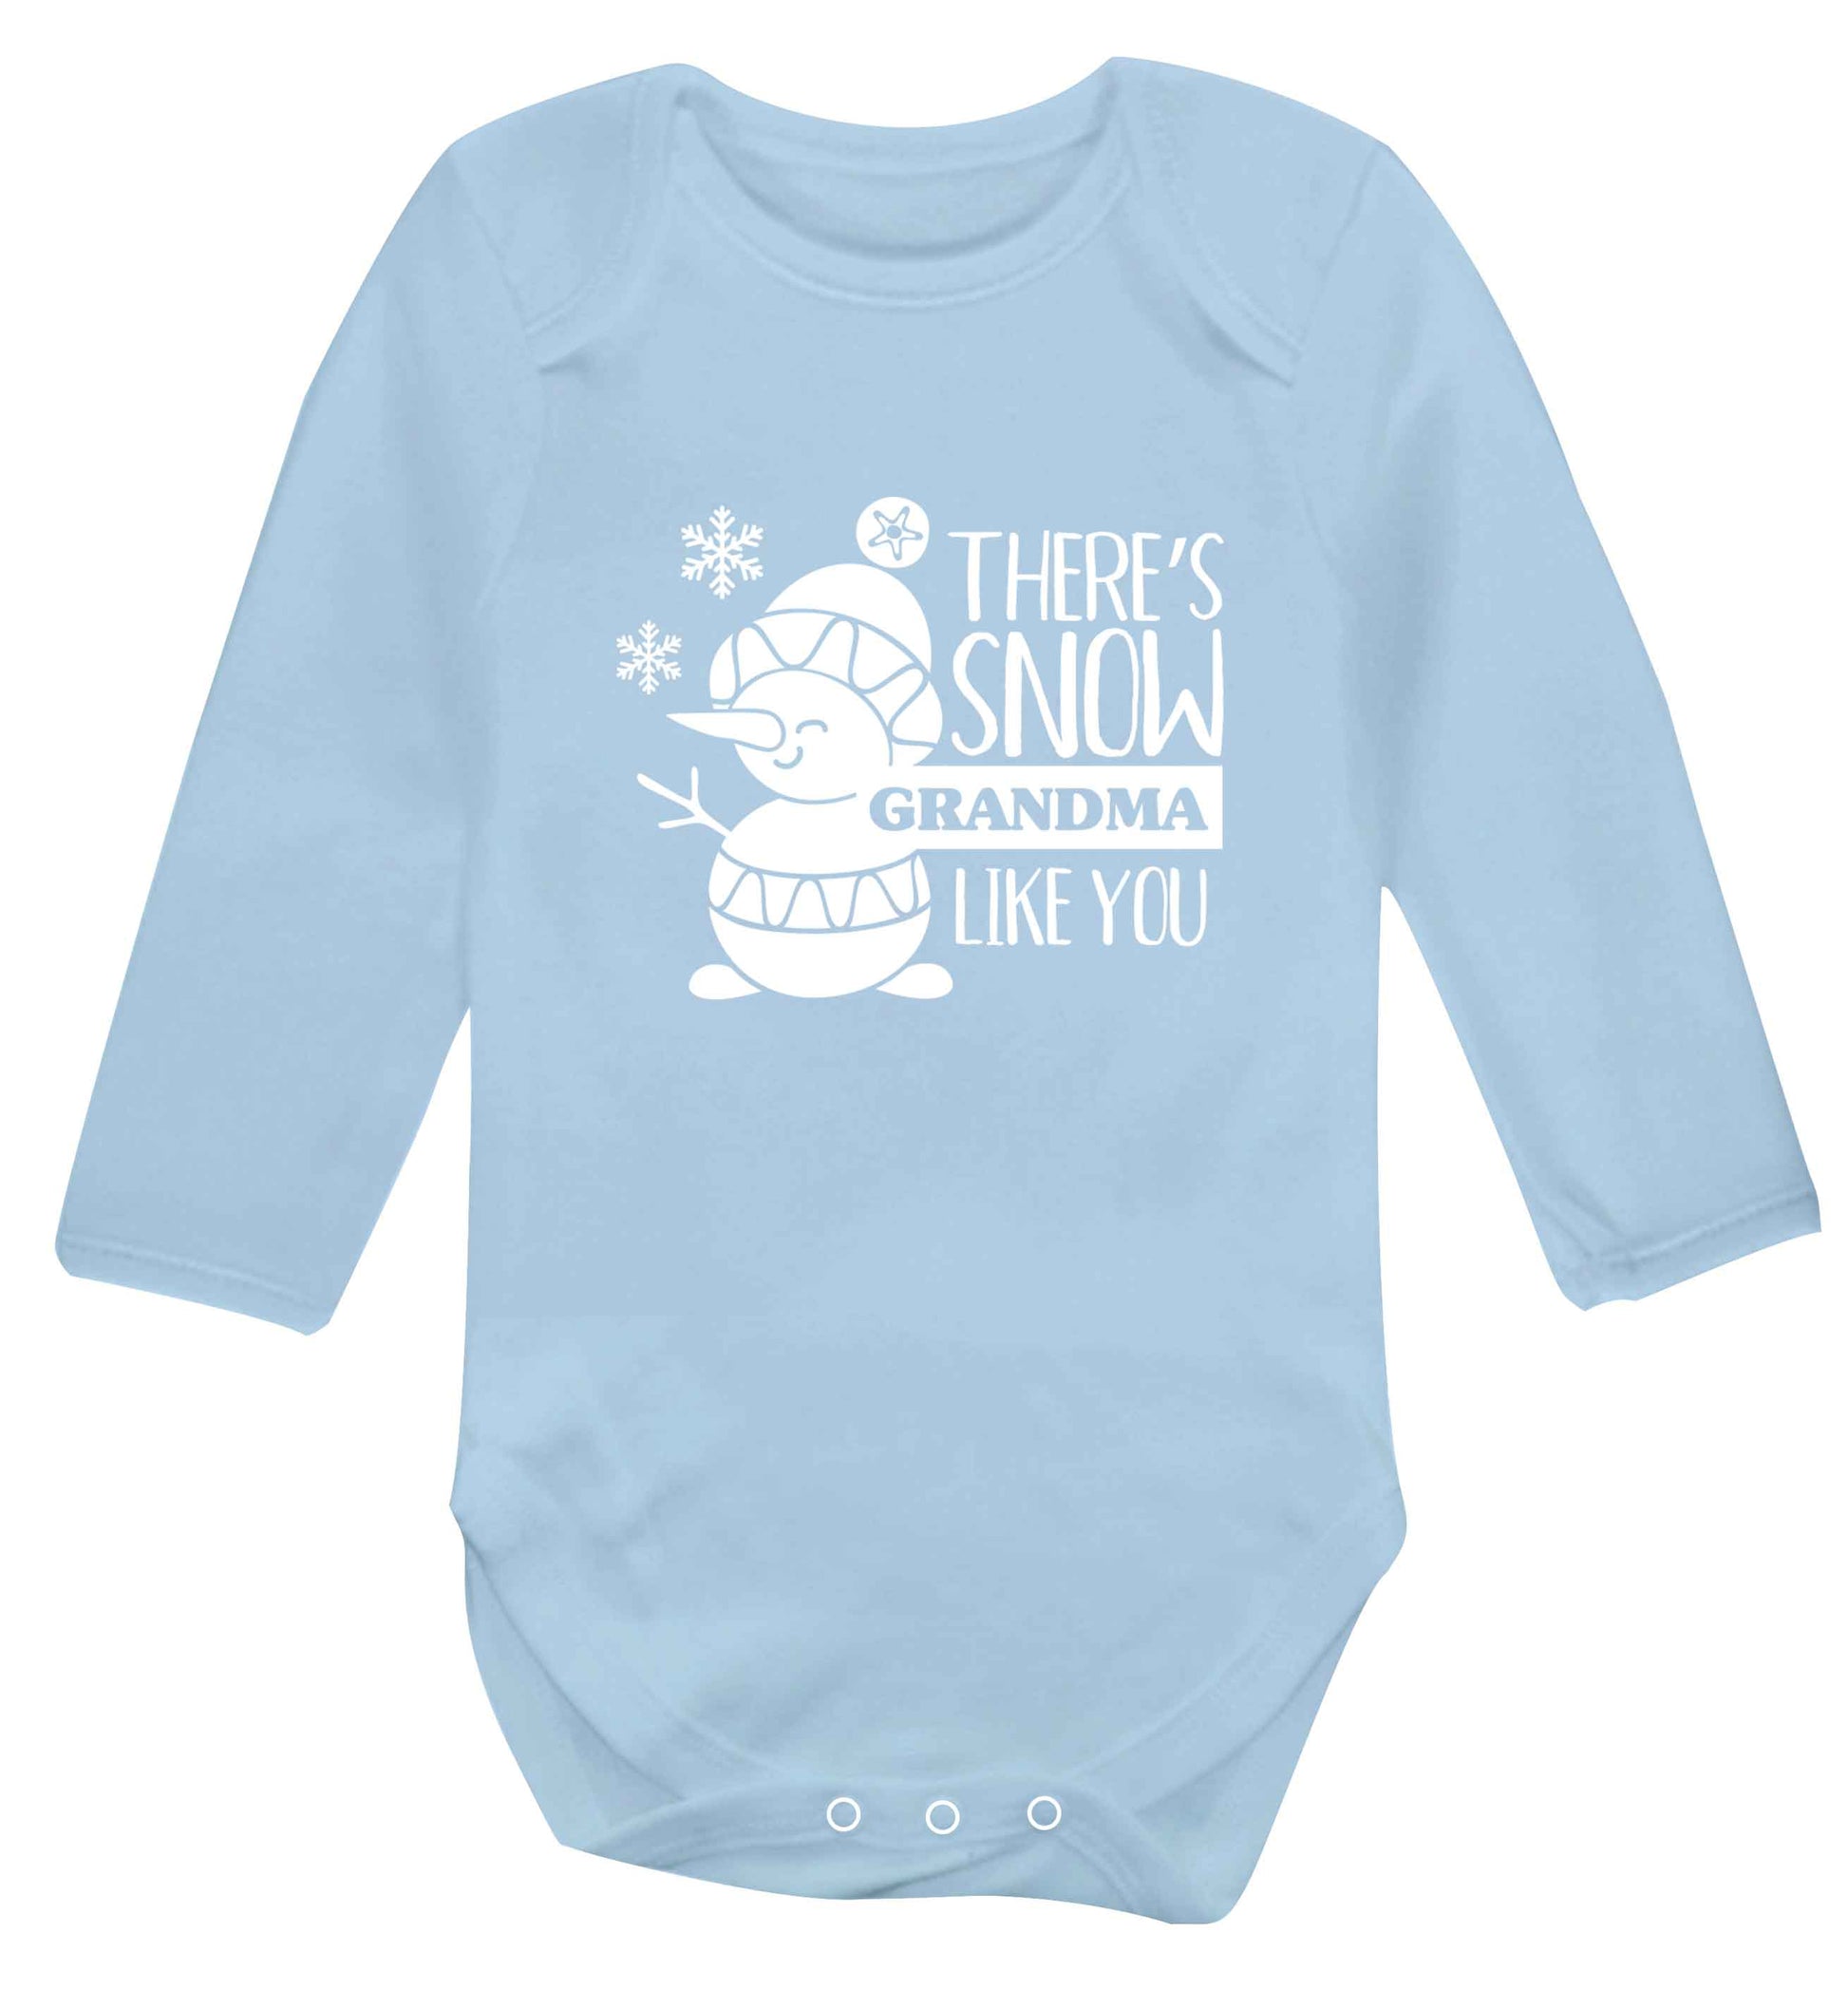 There's snow grandma like you baby vest long sleeved pale blue 6-12 months